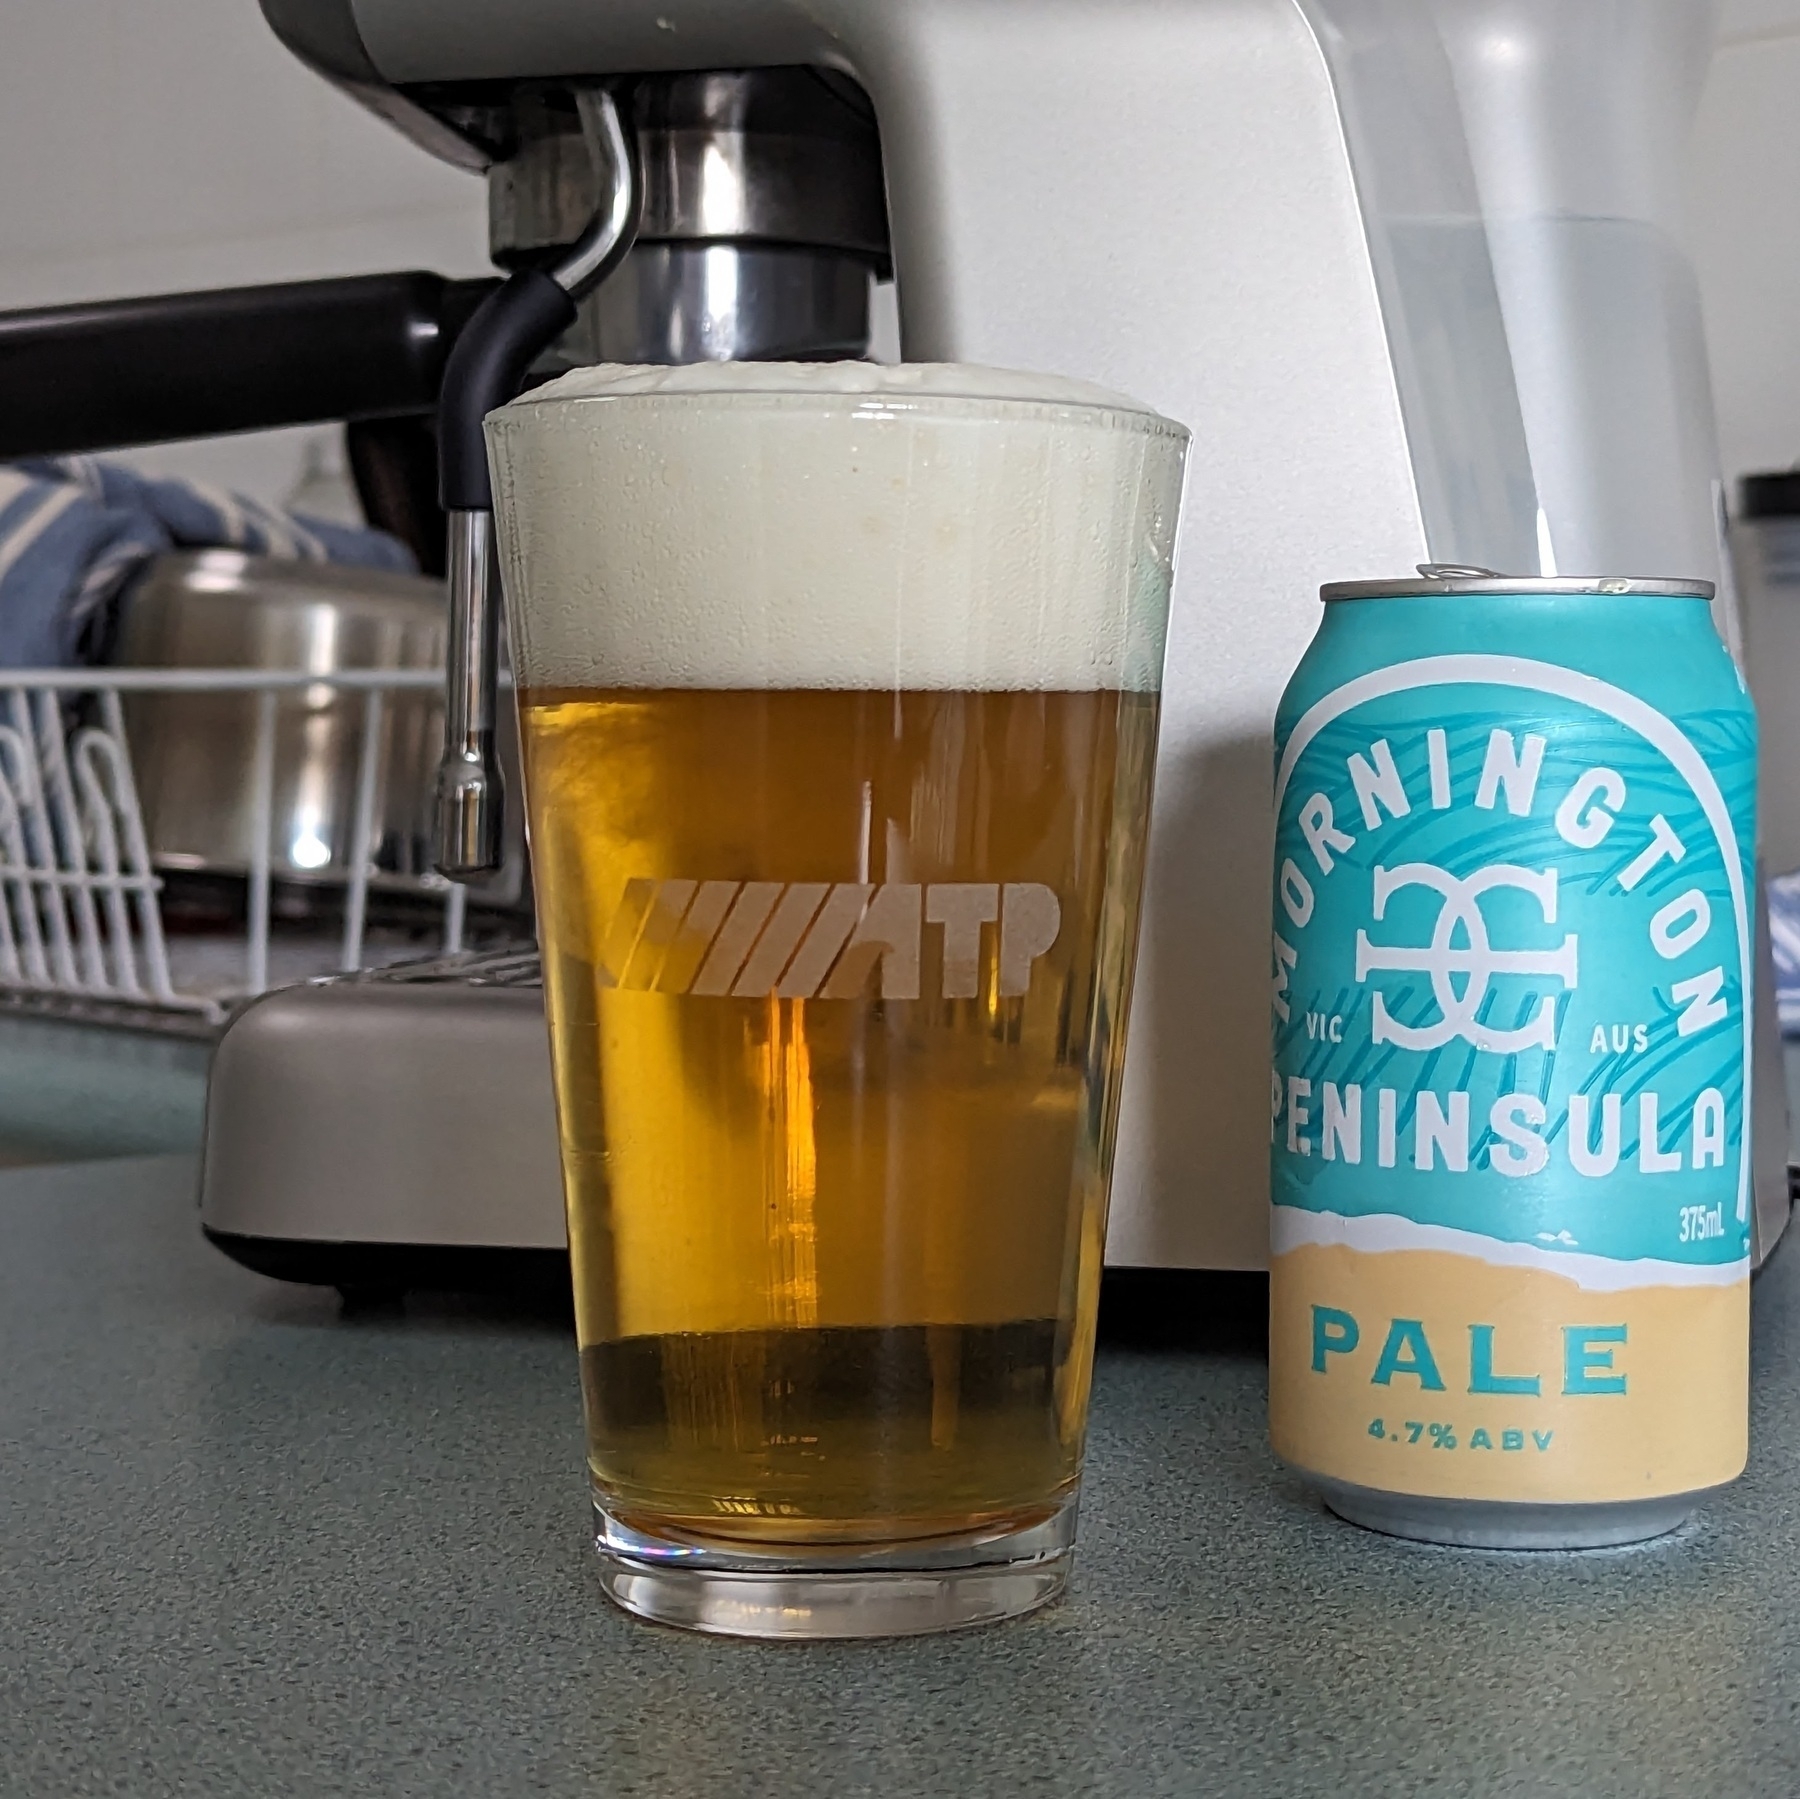 A can of Mornington Peninsula Pale-ale poured into an ATP glass, placed in front of a coffee machine